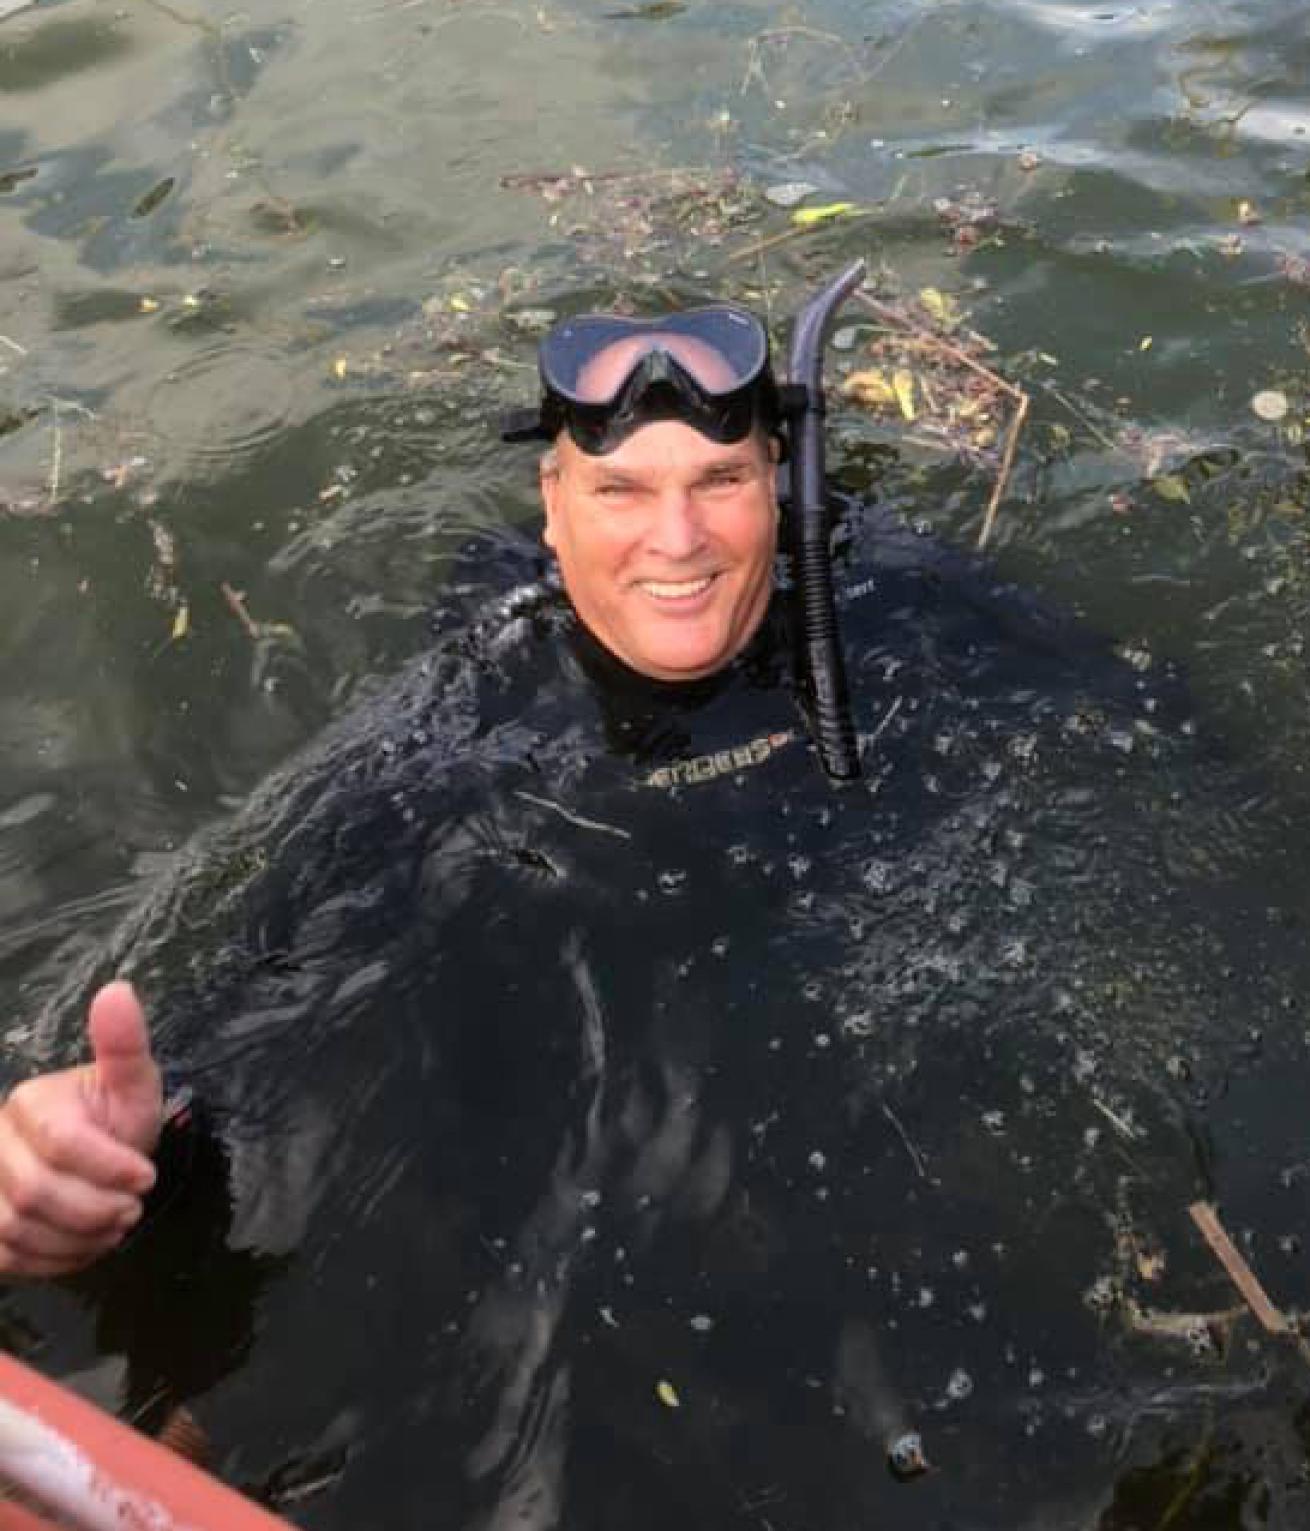 Robert Grattan gives a thumbs up from the water while wearing a wetsuit